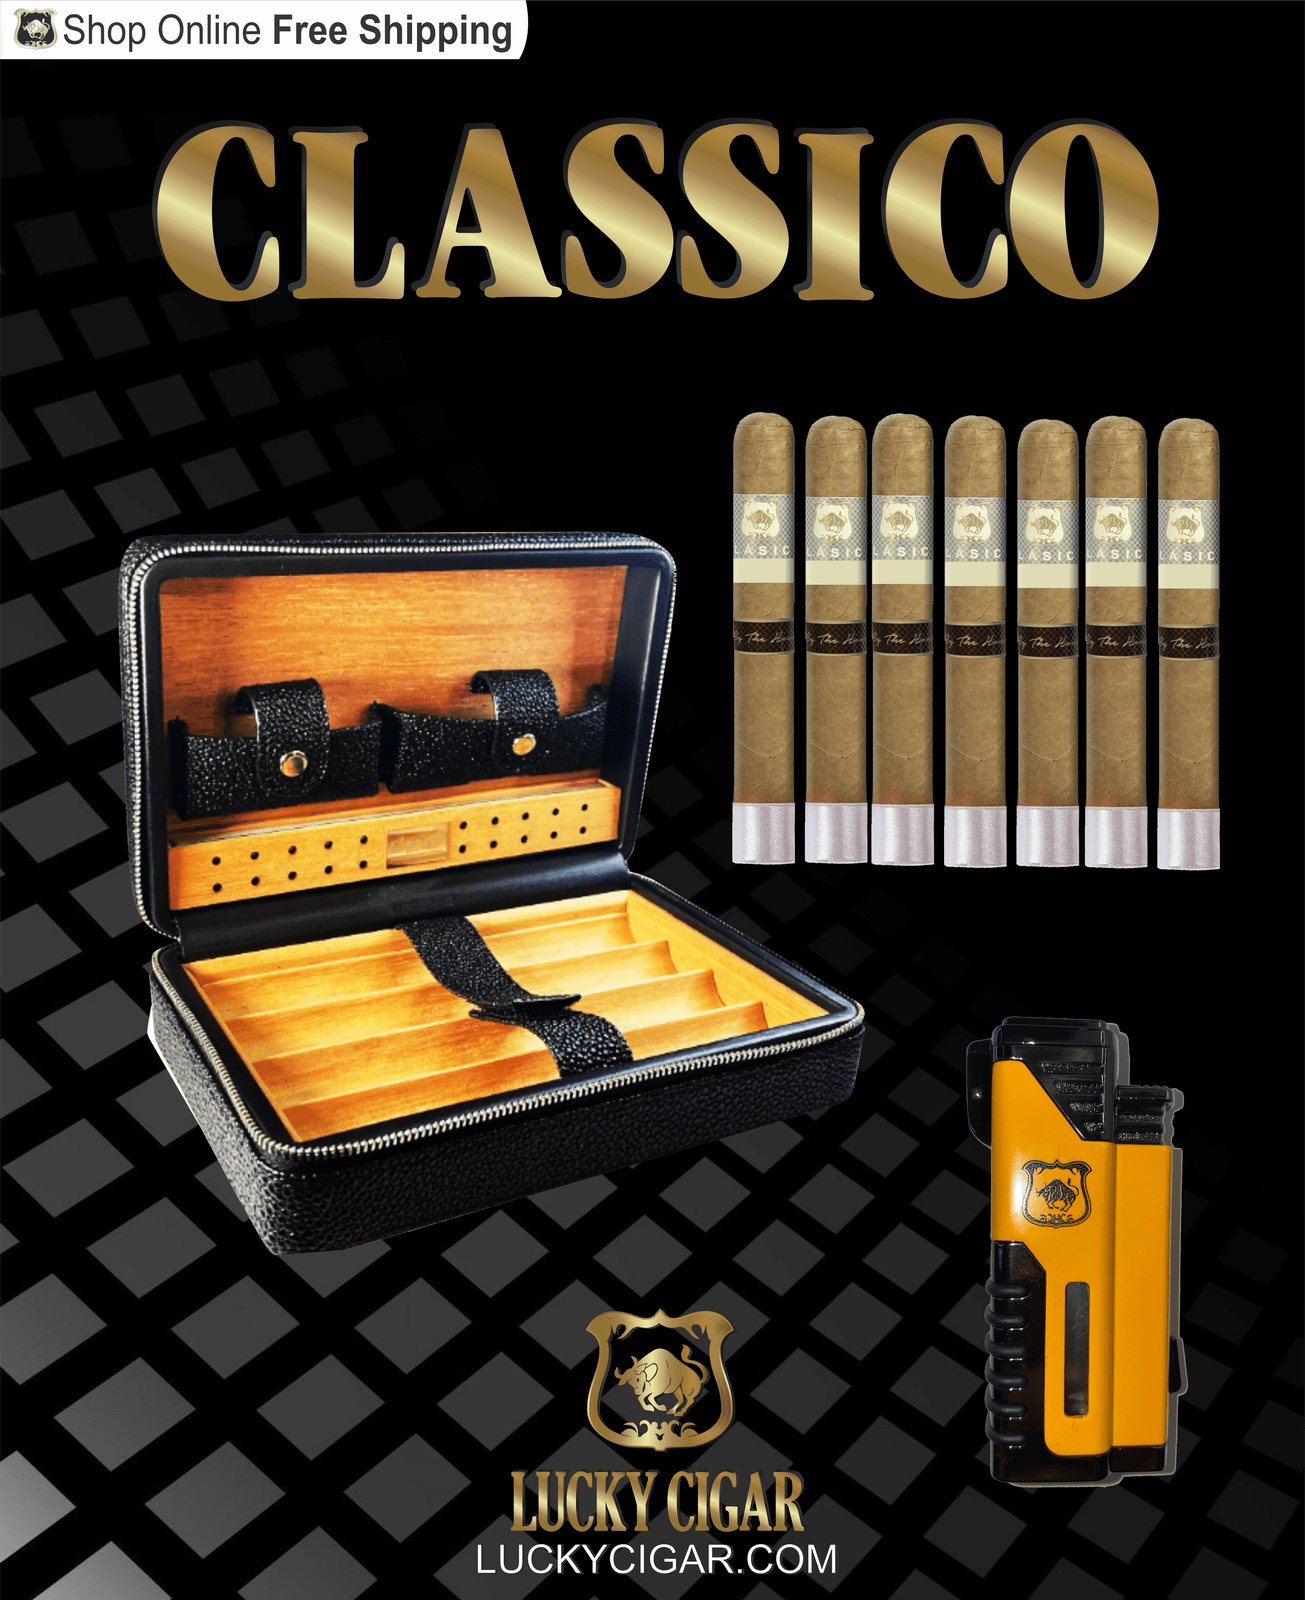 Lucky Cigar Sampler Sets: Set of 2 Classico Cigars with Torch, Travel Humidor Case